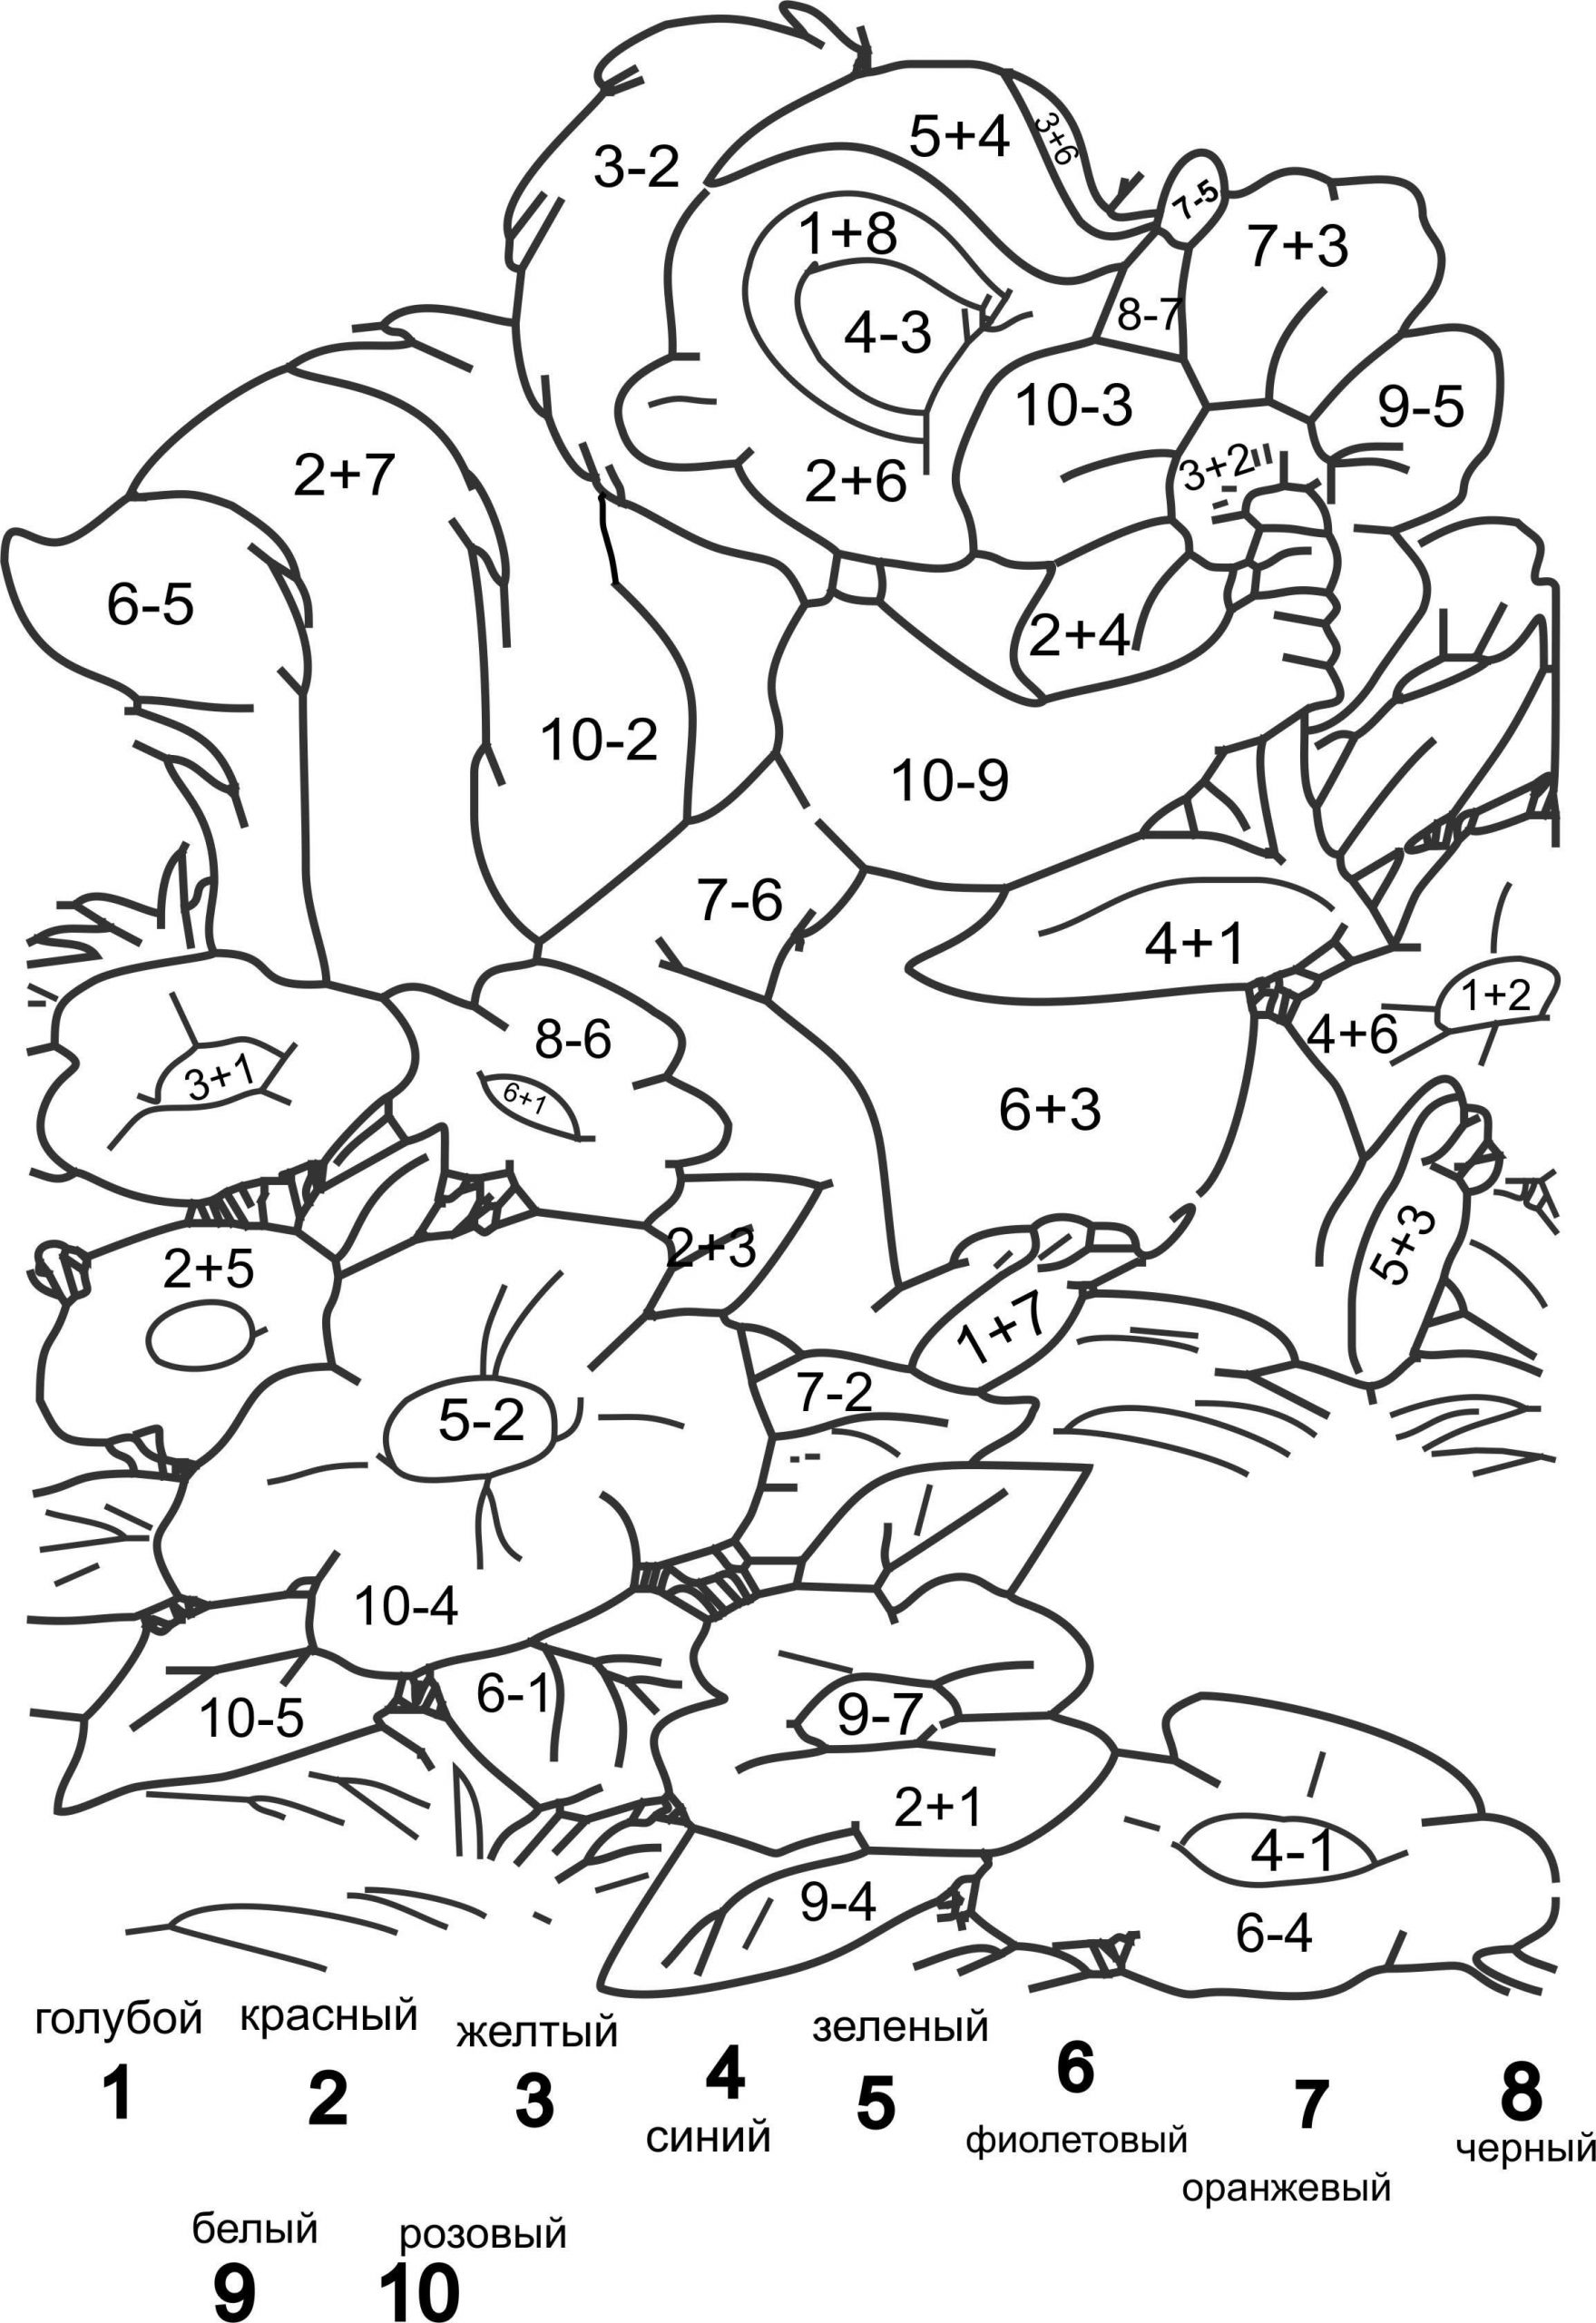 Coloring pages for 1st grade with skunk examples